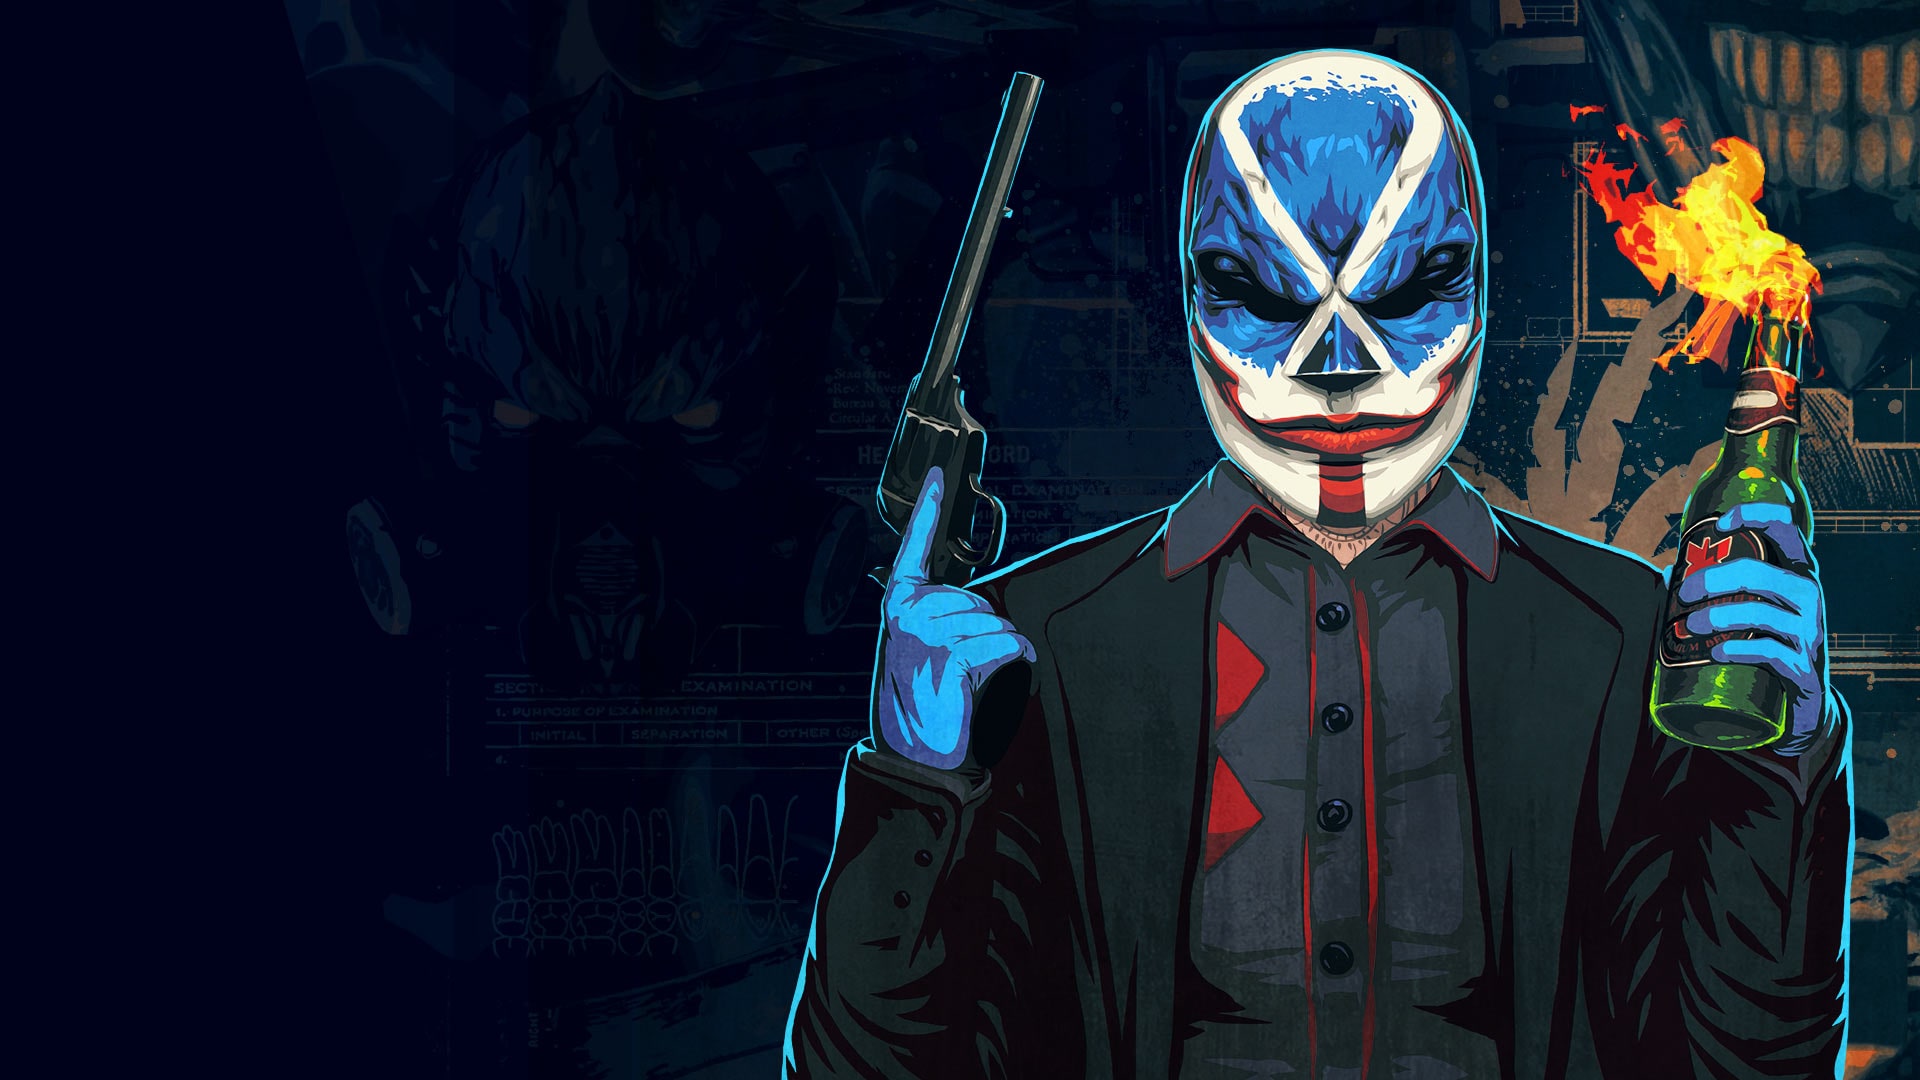 download payday 2 crimewave edition for free